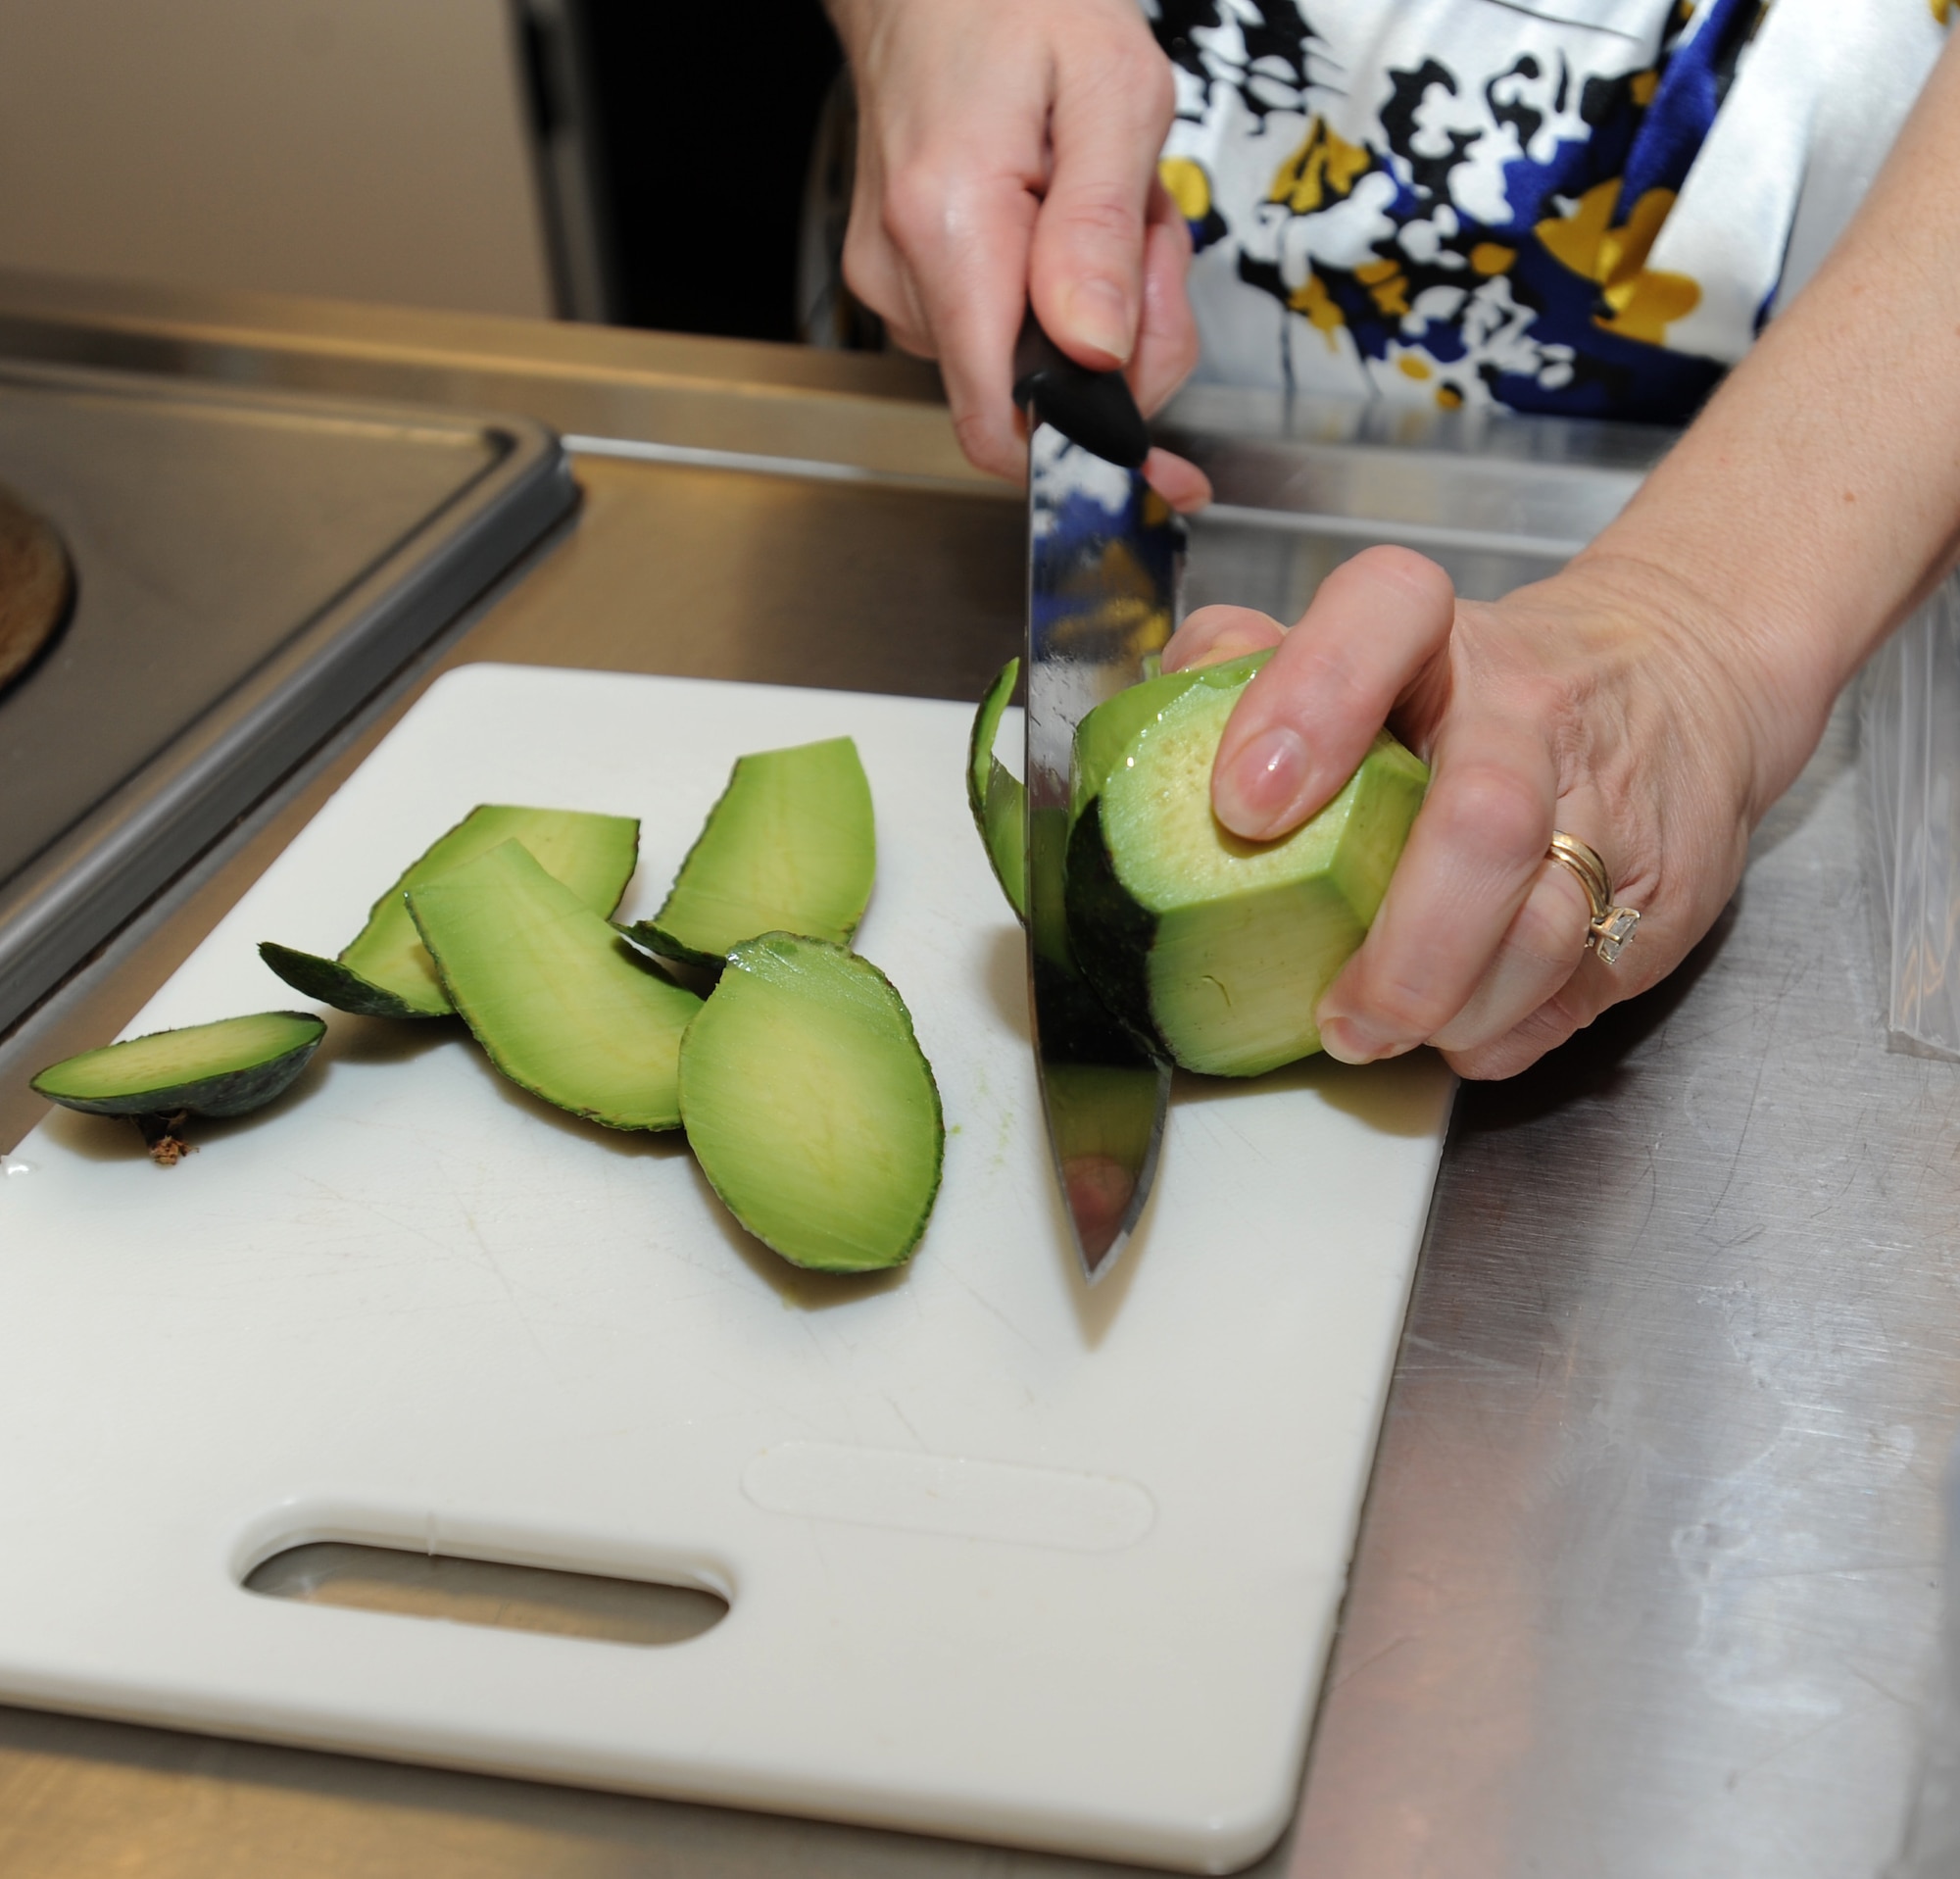 A Health and Wellness Center registered dietician, prepares an avocado for a recipe during a healthy holiday eating class